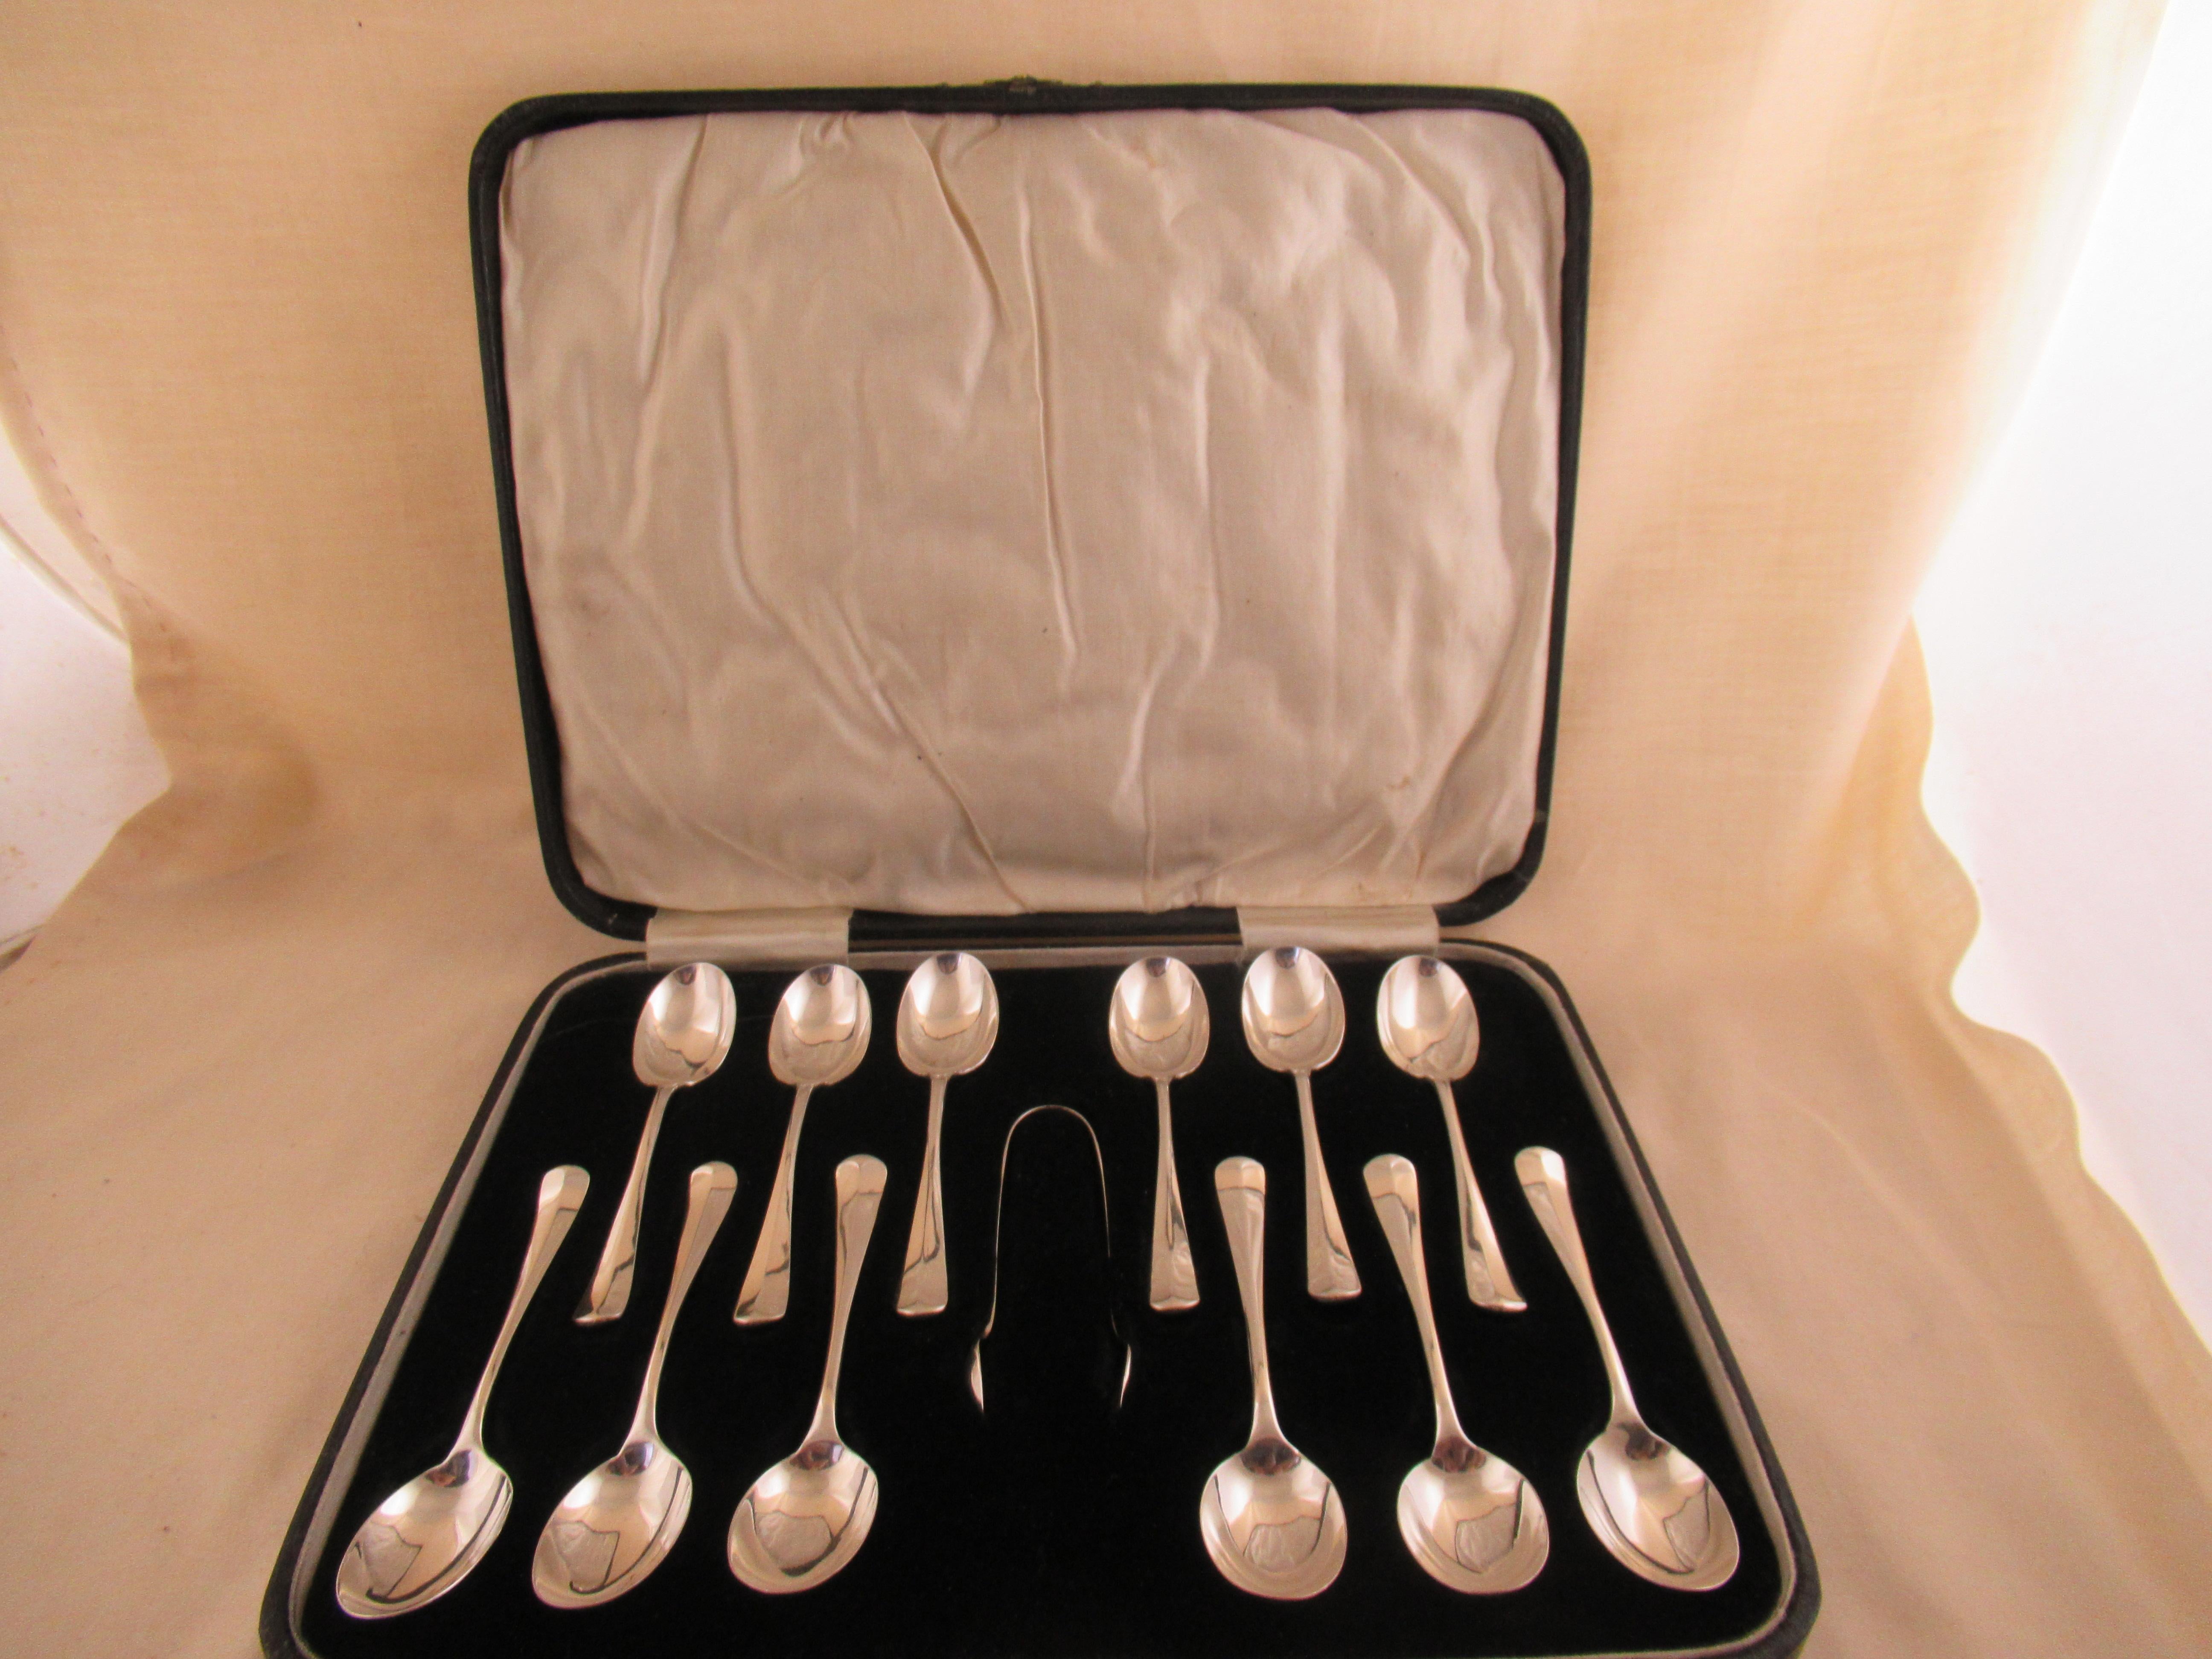 Sterling silver box of 12 Hanoverian teaspoons + tongs.
Made in England and with the maker`s mark - B.B. over S.Ld., for
Barker brothers silver Ltd., paradise street, Birmingham.

A full set of English hallmarks applied by the Birmingham assay